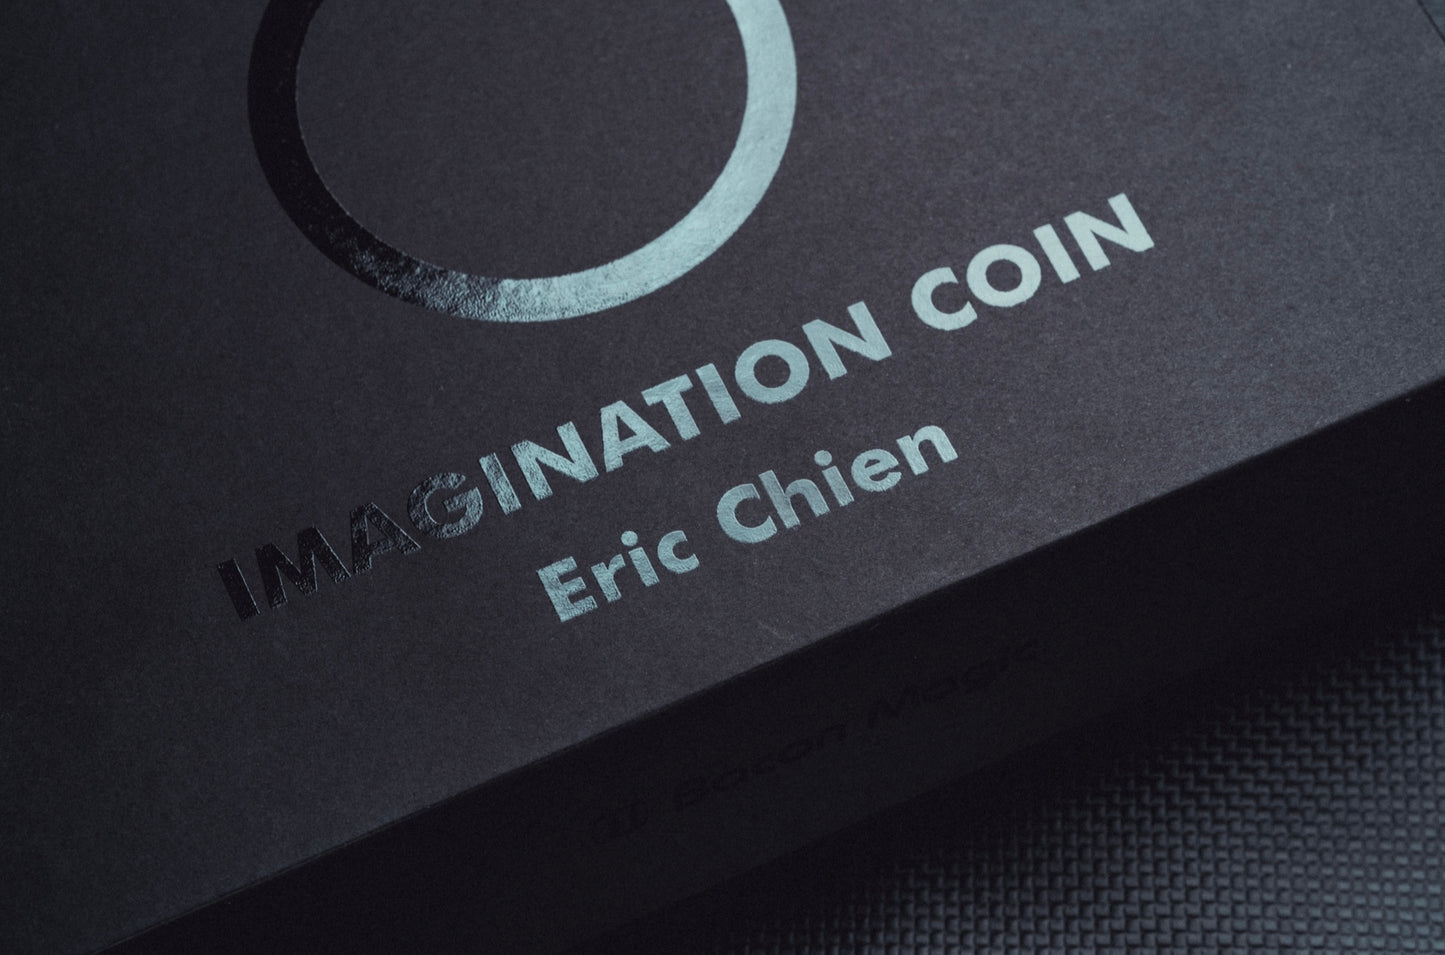 Imagination Coin by Eric Chien